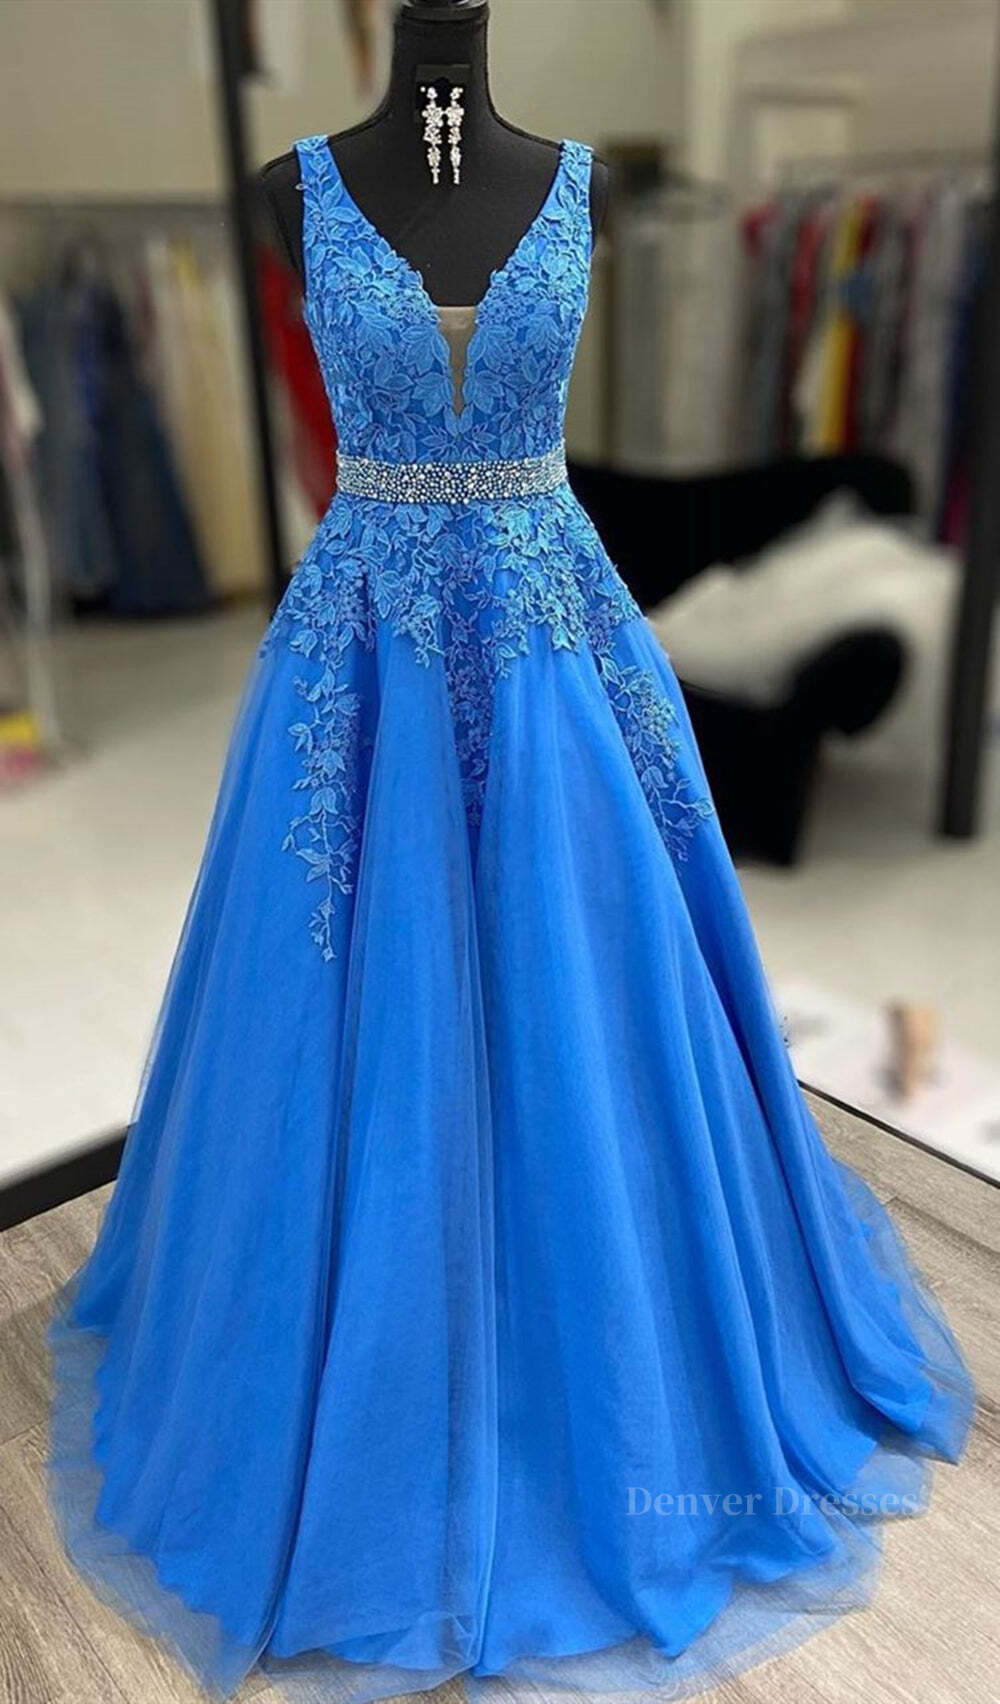 Prom Dresses 2055 Fashion Outfit, A Line V Neck Blue Lace Long Prom Dresses with Belt, Blue Lace Formal Evening Dresses